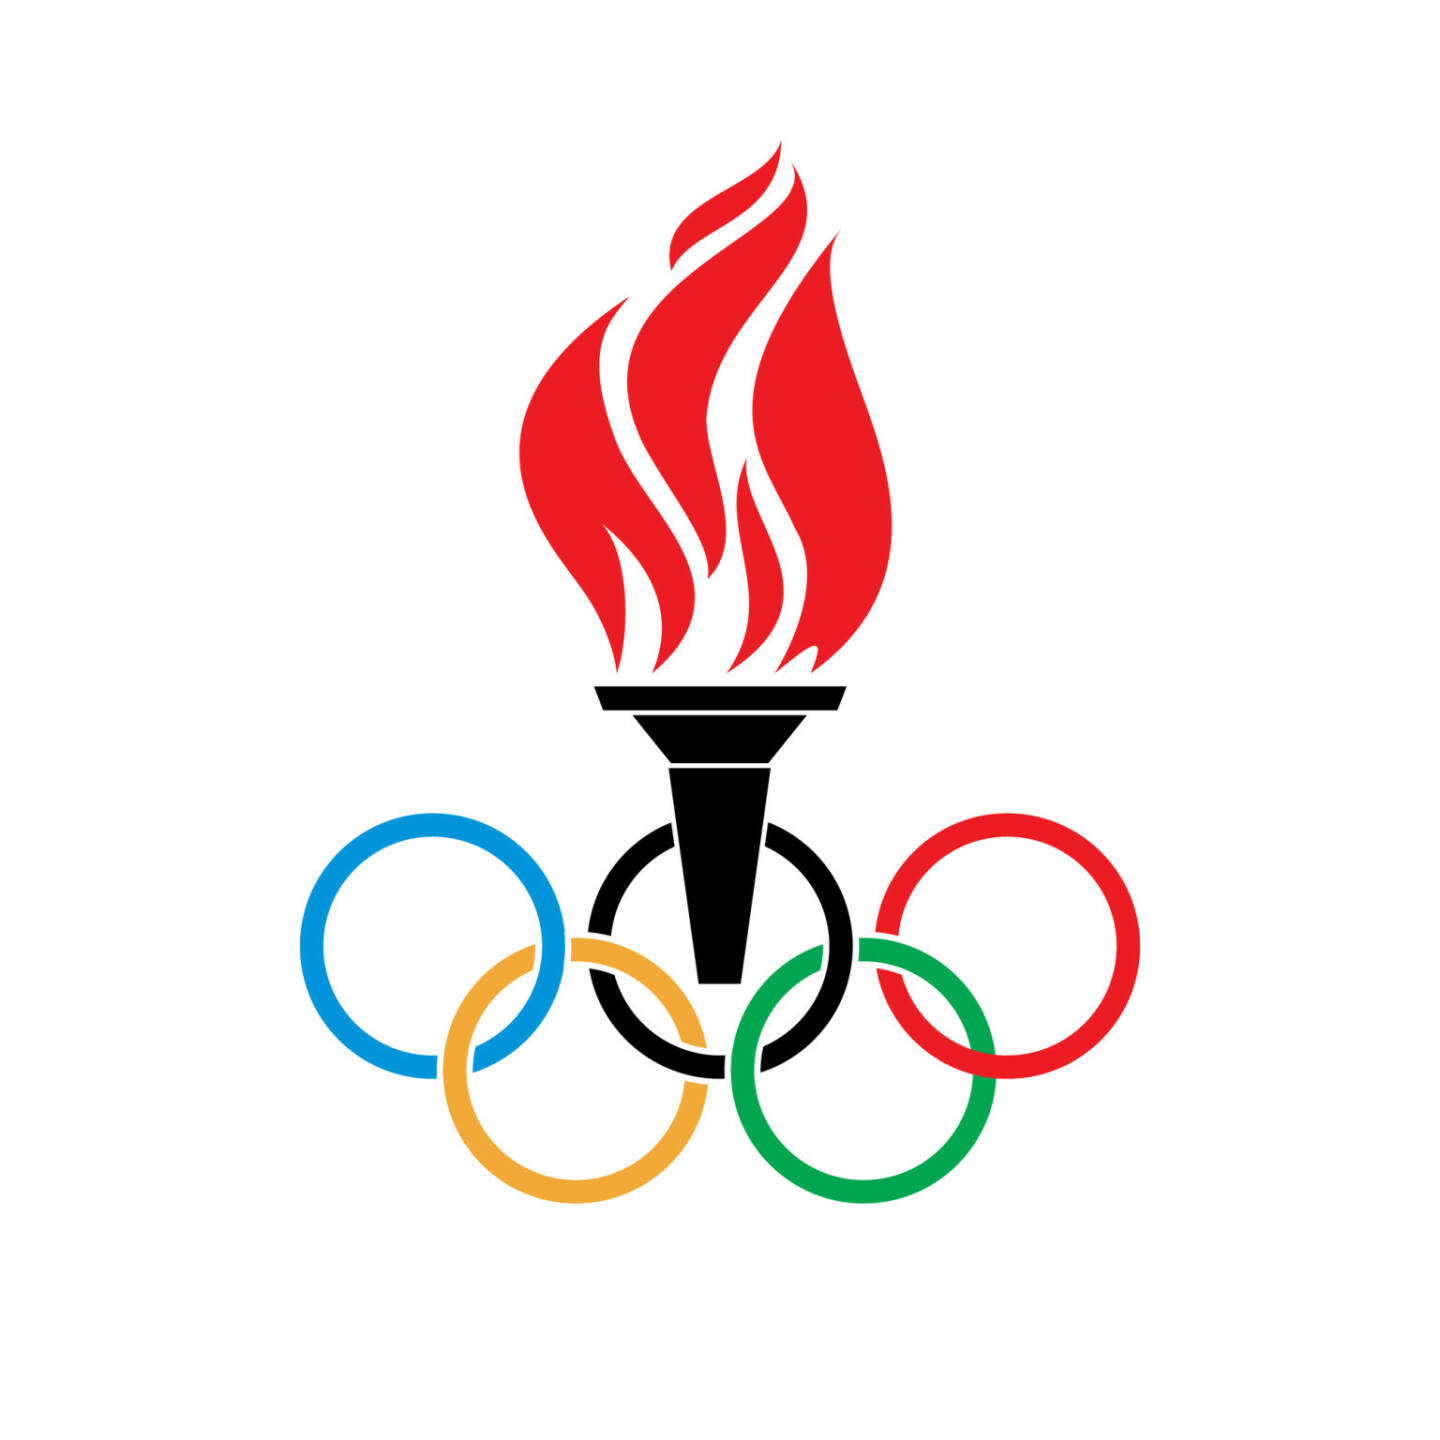 Olympia, Olympische Spiele, Ringe, Fackel - https://de.depositphotos.com/40590641/stock-illustration-olympic-symbols-torch-and-rings.html